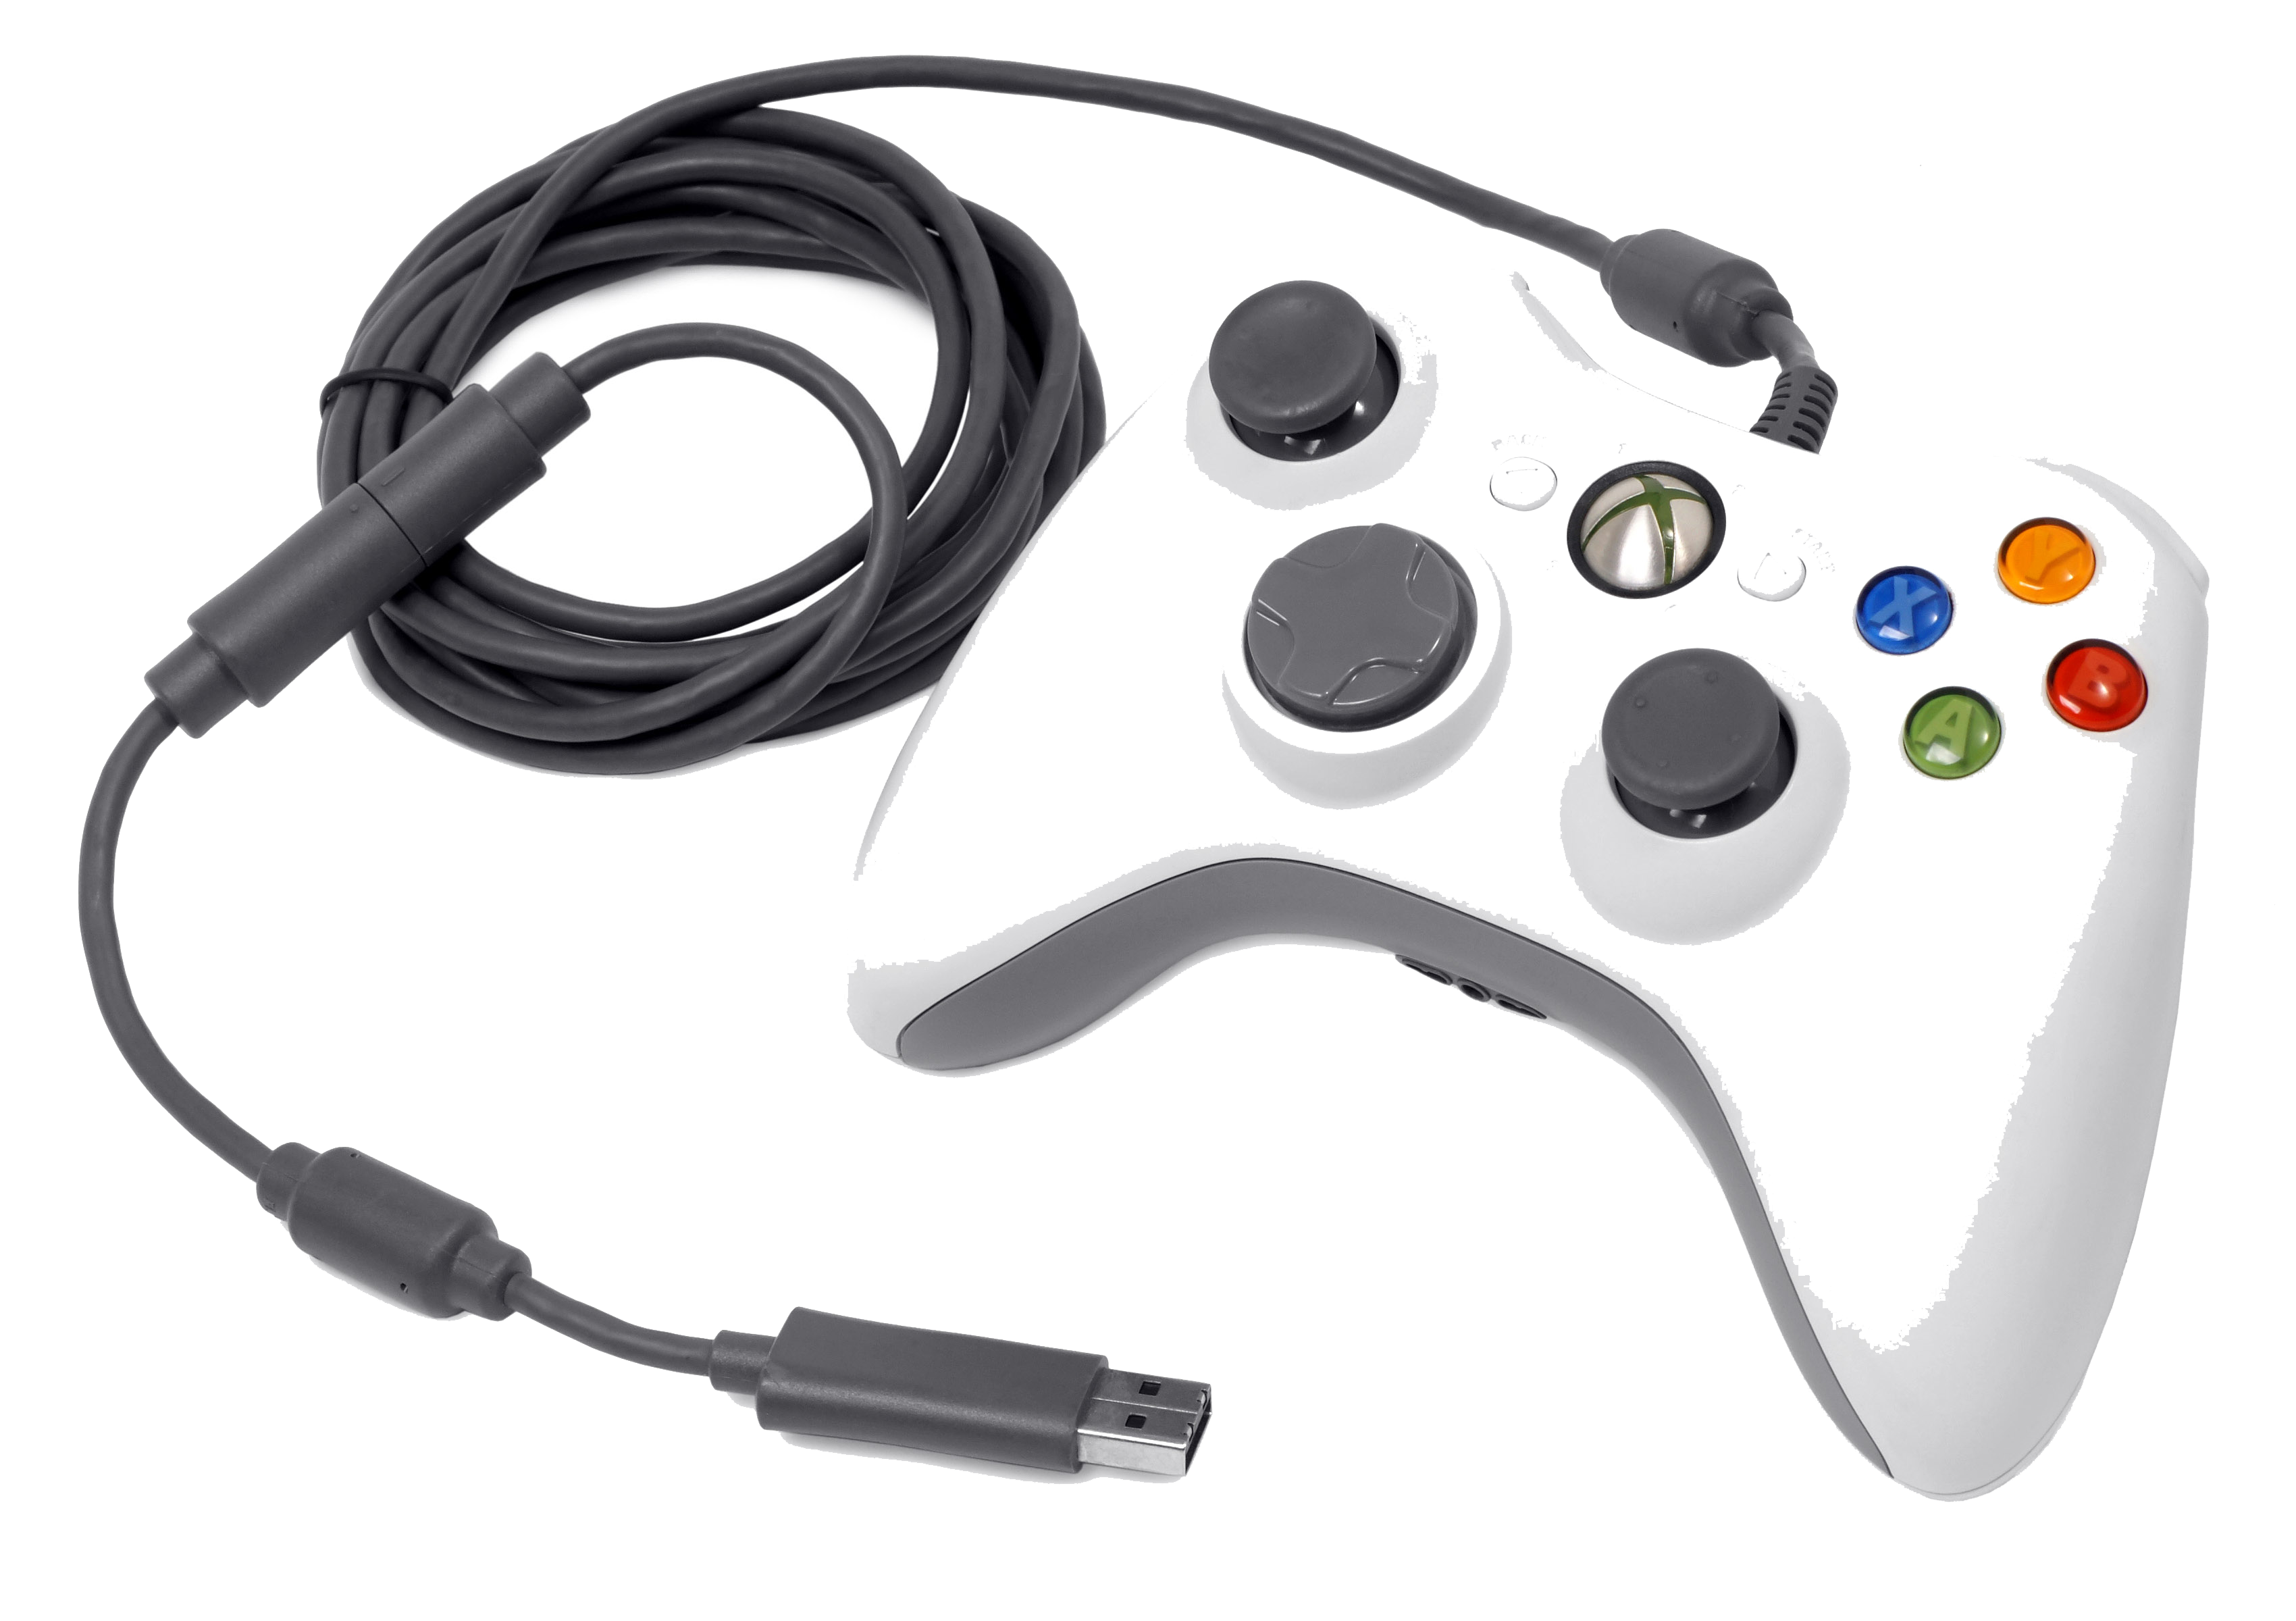 Wired Or Wireless Controller For Pc Gaming